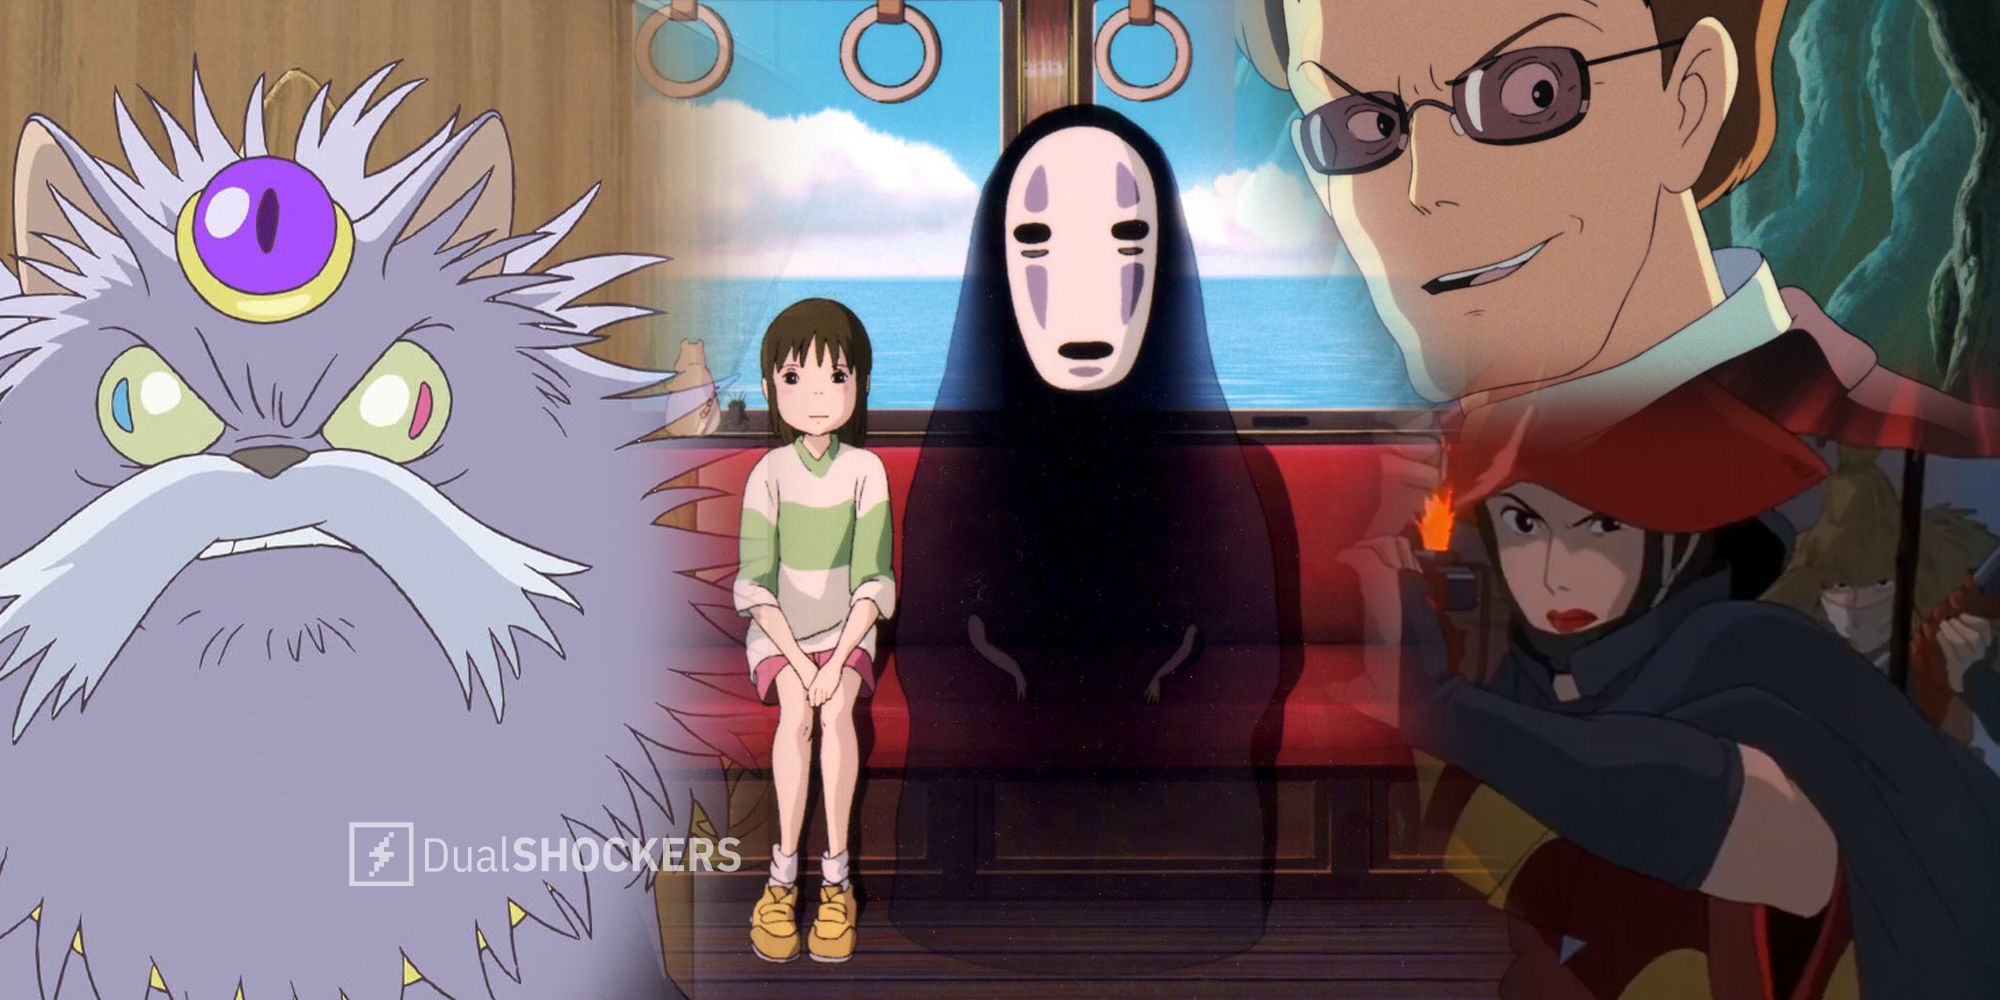 The Cat King (The Cat Returns), No Face (Spirited Away), Colonel Muska (Castle in the Sky)